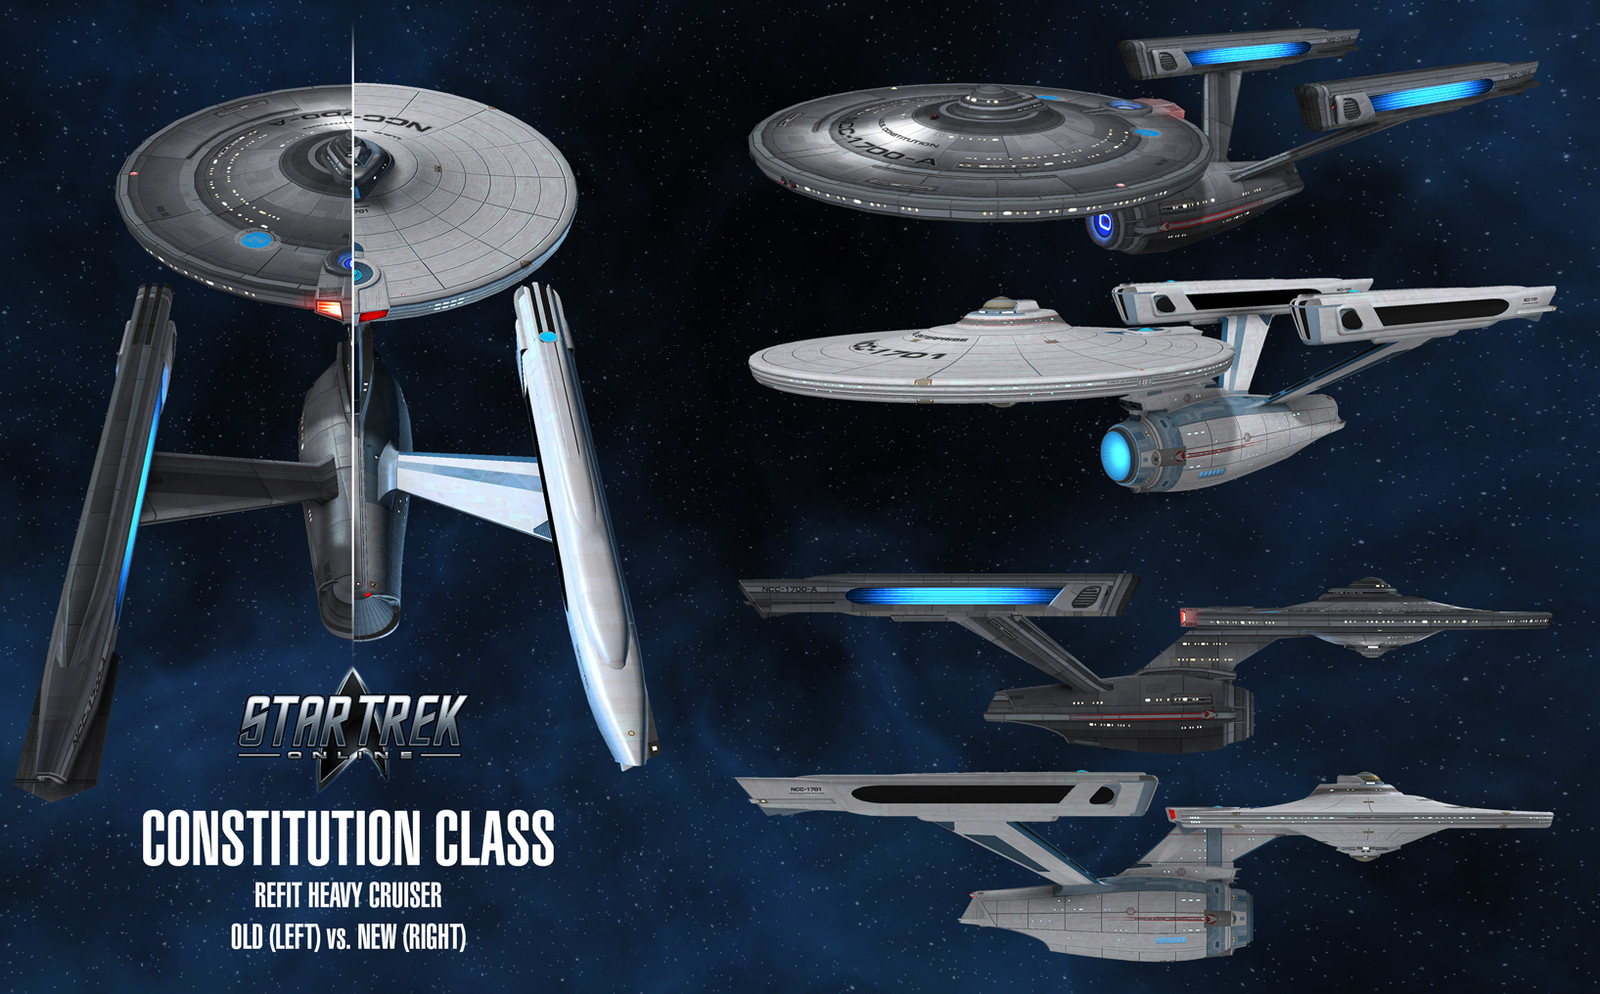 Before and after comparison of the original STO model and the new one.